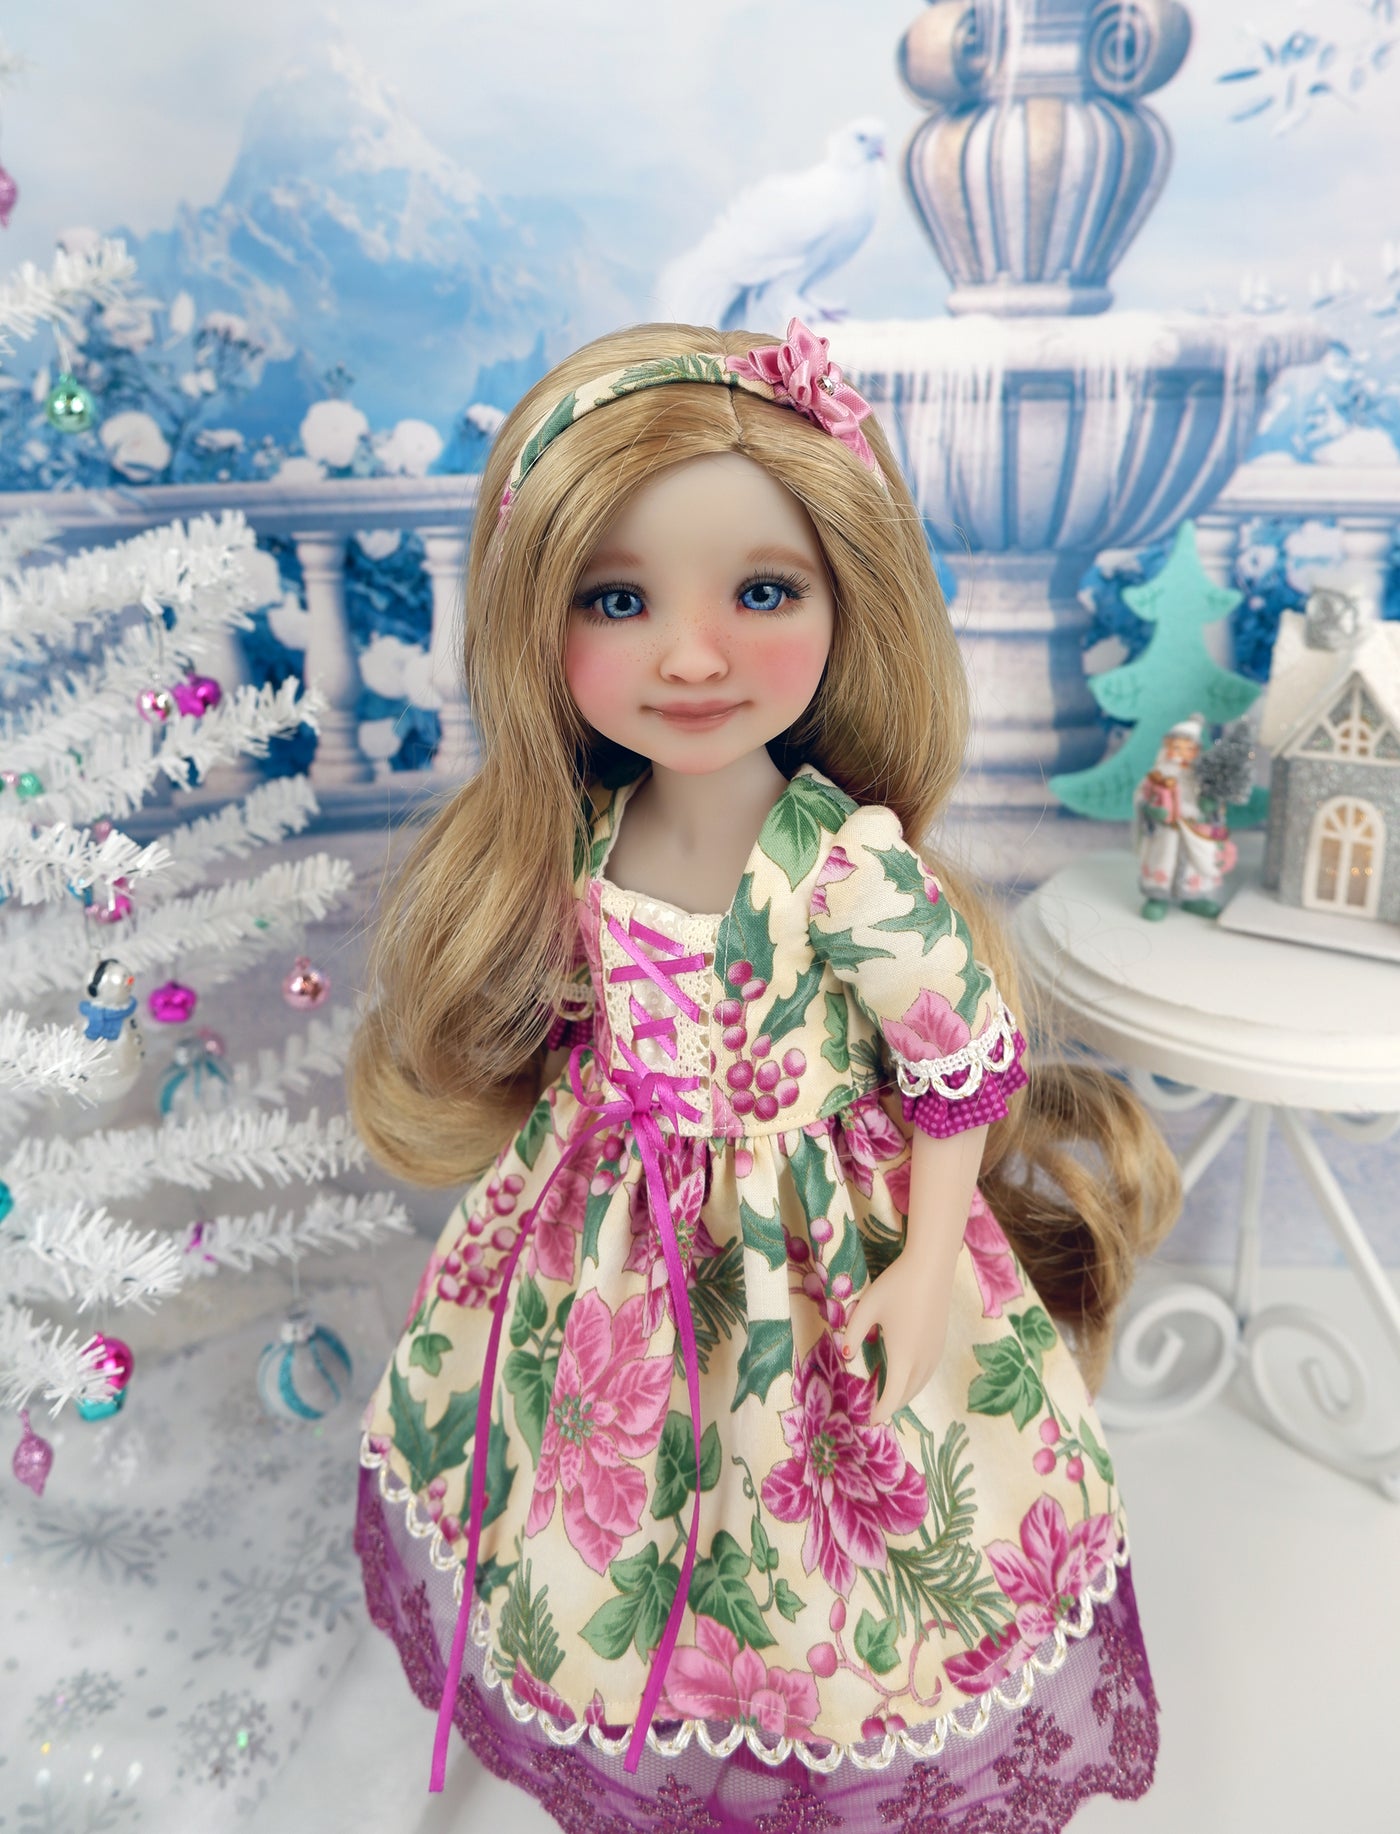 Poinsettia Elegance - dirndl dress ensemble with shoes for Ruby Red Fashion Friends doll